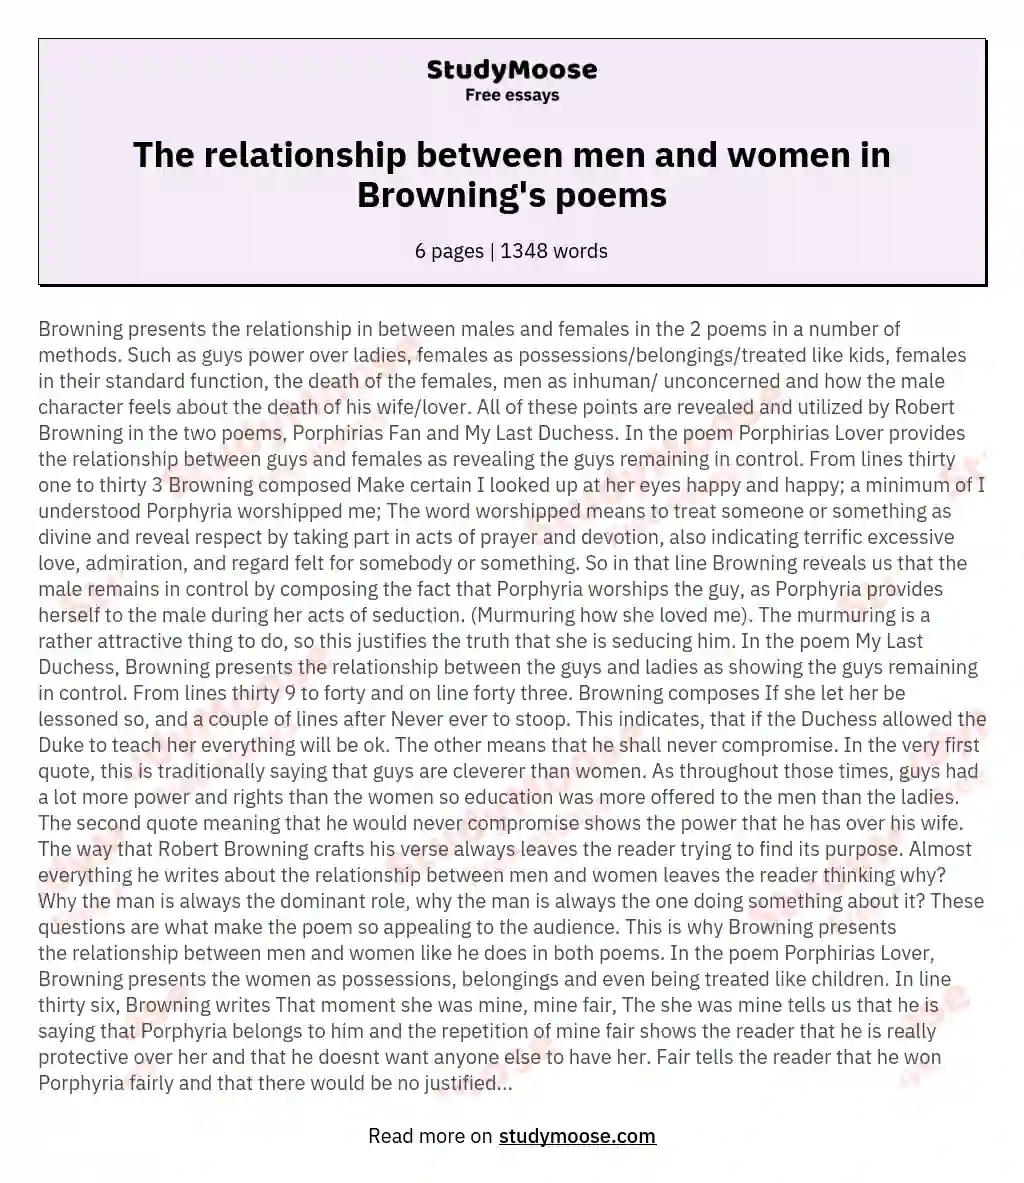 The relationship between men and women in Browning's poems essay